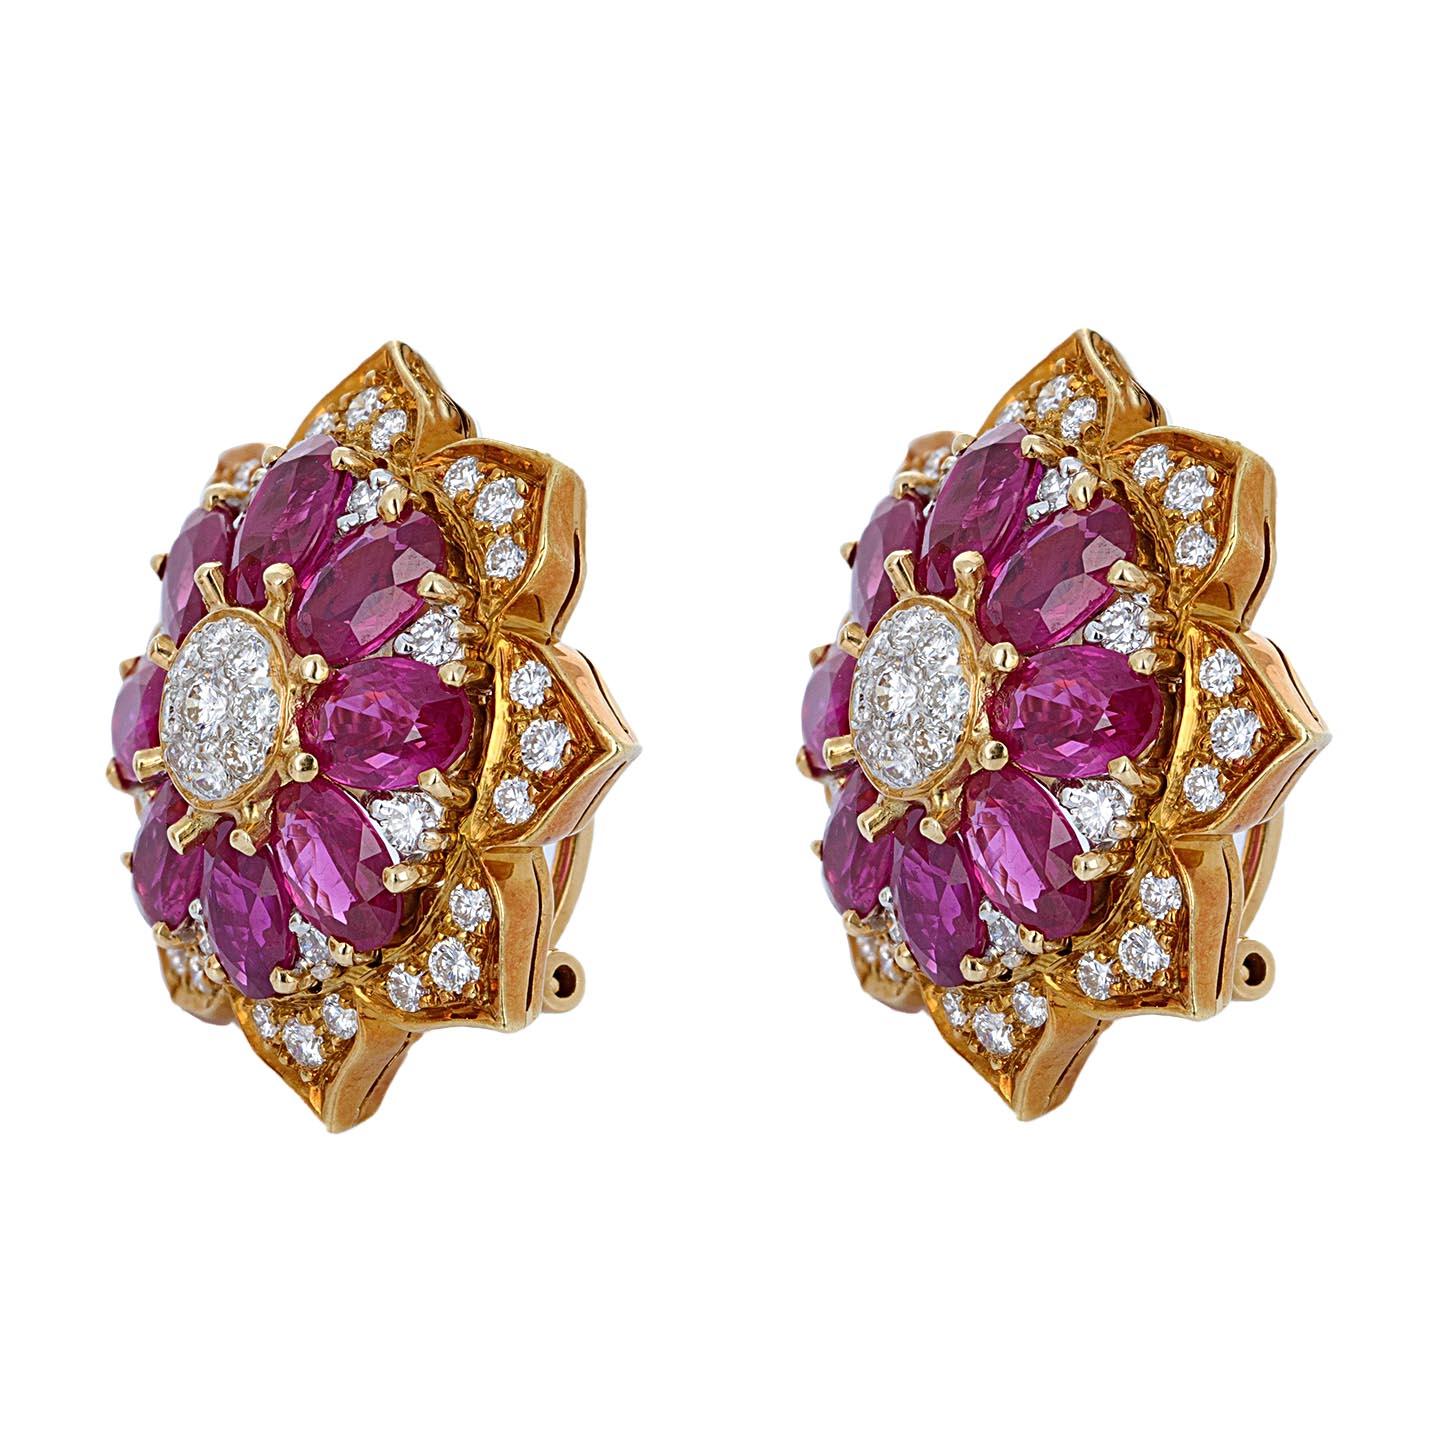 18 karat yellow gold diamond and ruby french back earrings. The earrings are made for pierced and not pierced ears. The post on the back moves up (for pierced) or down (for clip-on).

There are 16 oval shape rubies estimated at 7 carats total weight.